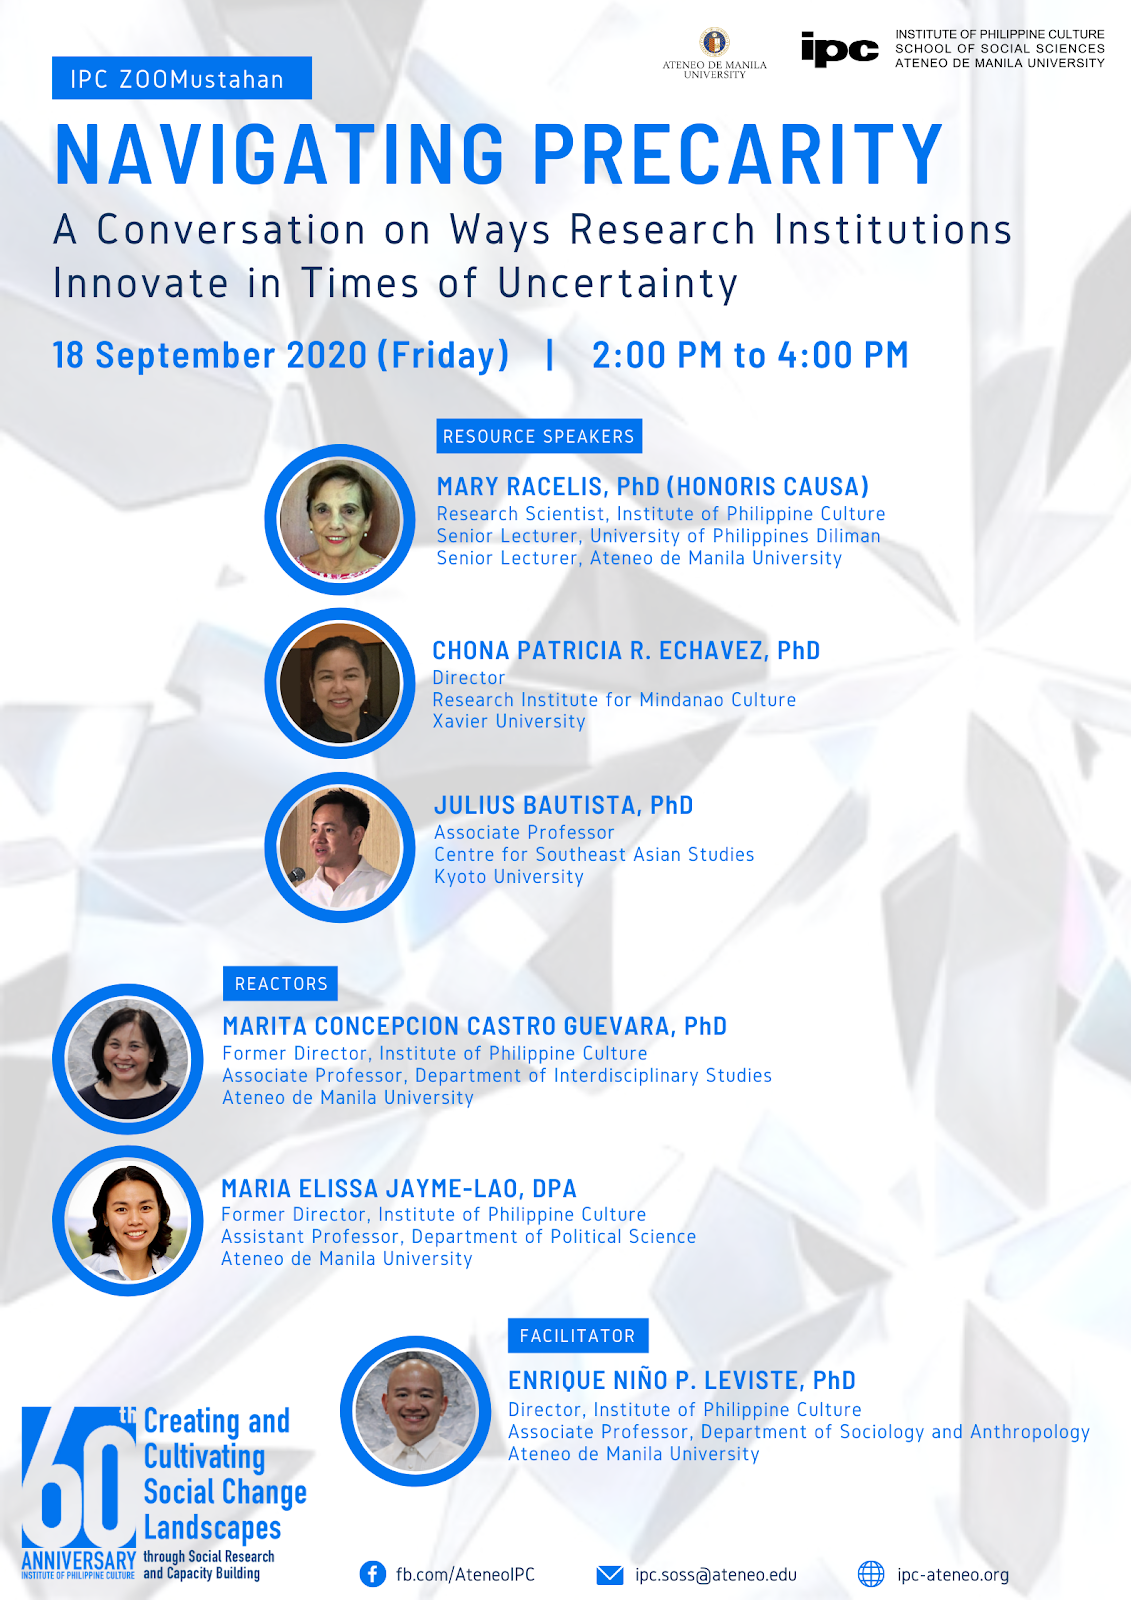 IPC ZOOMustahan “Navigating Precarity: A Conversation on Ways Research Institutions Innovate in Times of Uncertainty”